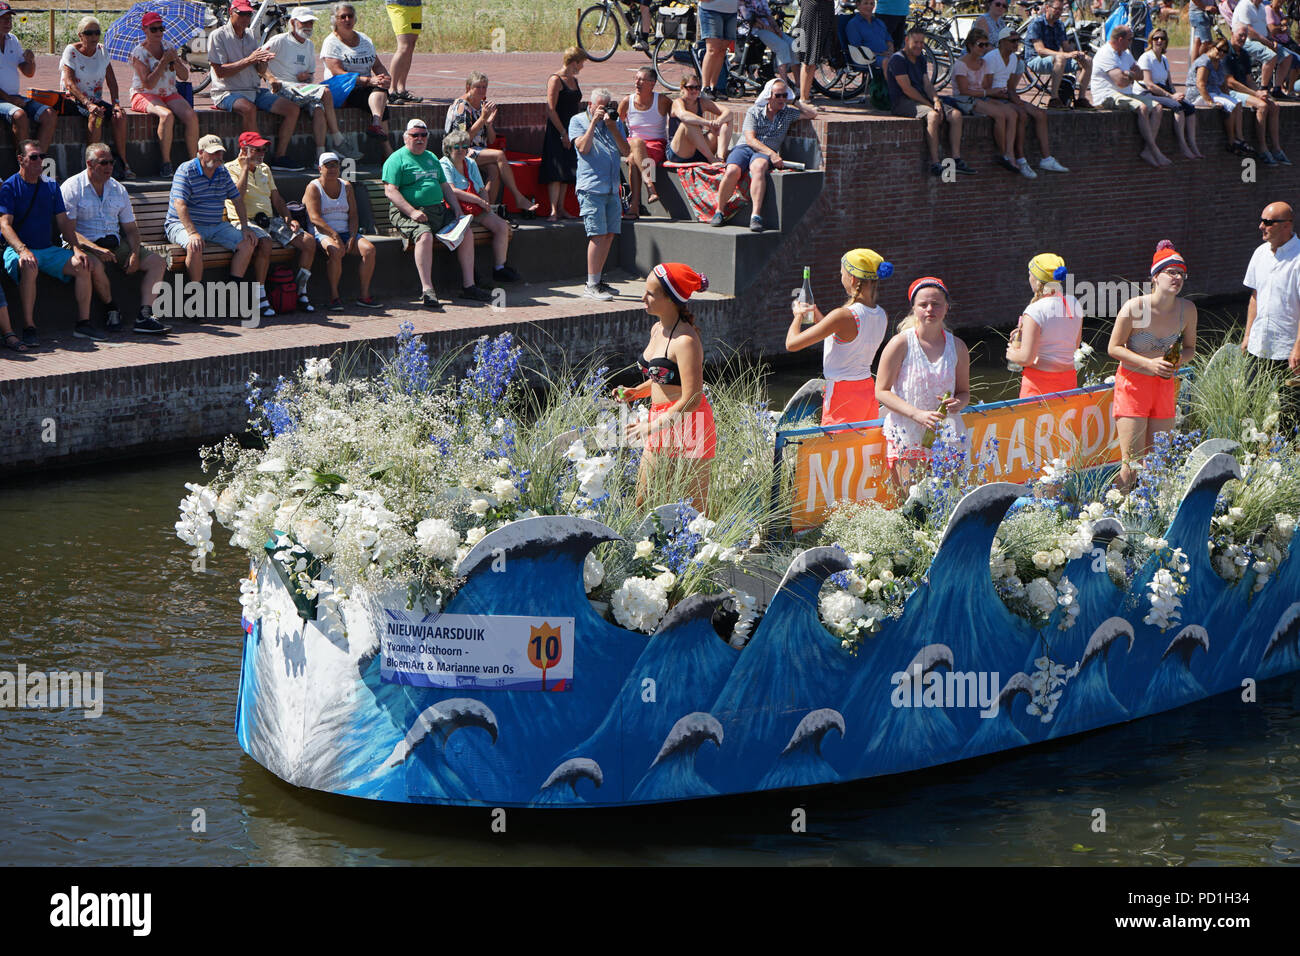 Netherlands,Delft-5 August 2018:Westland Boat Parade (Varend Corso),festive  spectacle,boats decorated with flowers and vegetables, colorful sailing  flower parade in the Westland region Credit: SkandaRamana/Alamy Live News  Stock Photo - Alamy